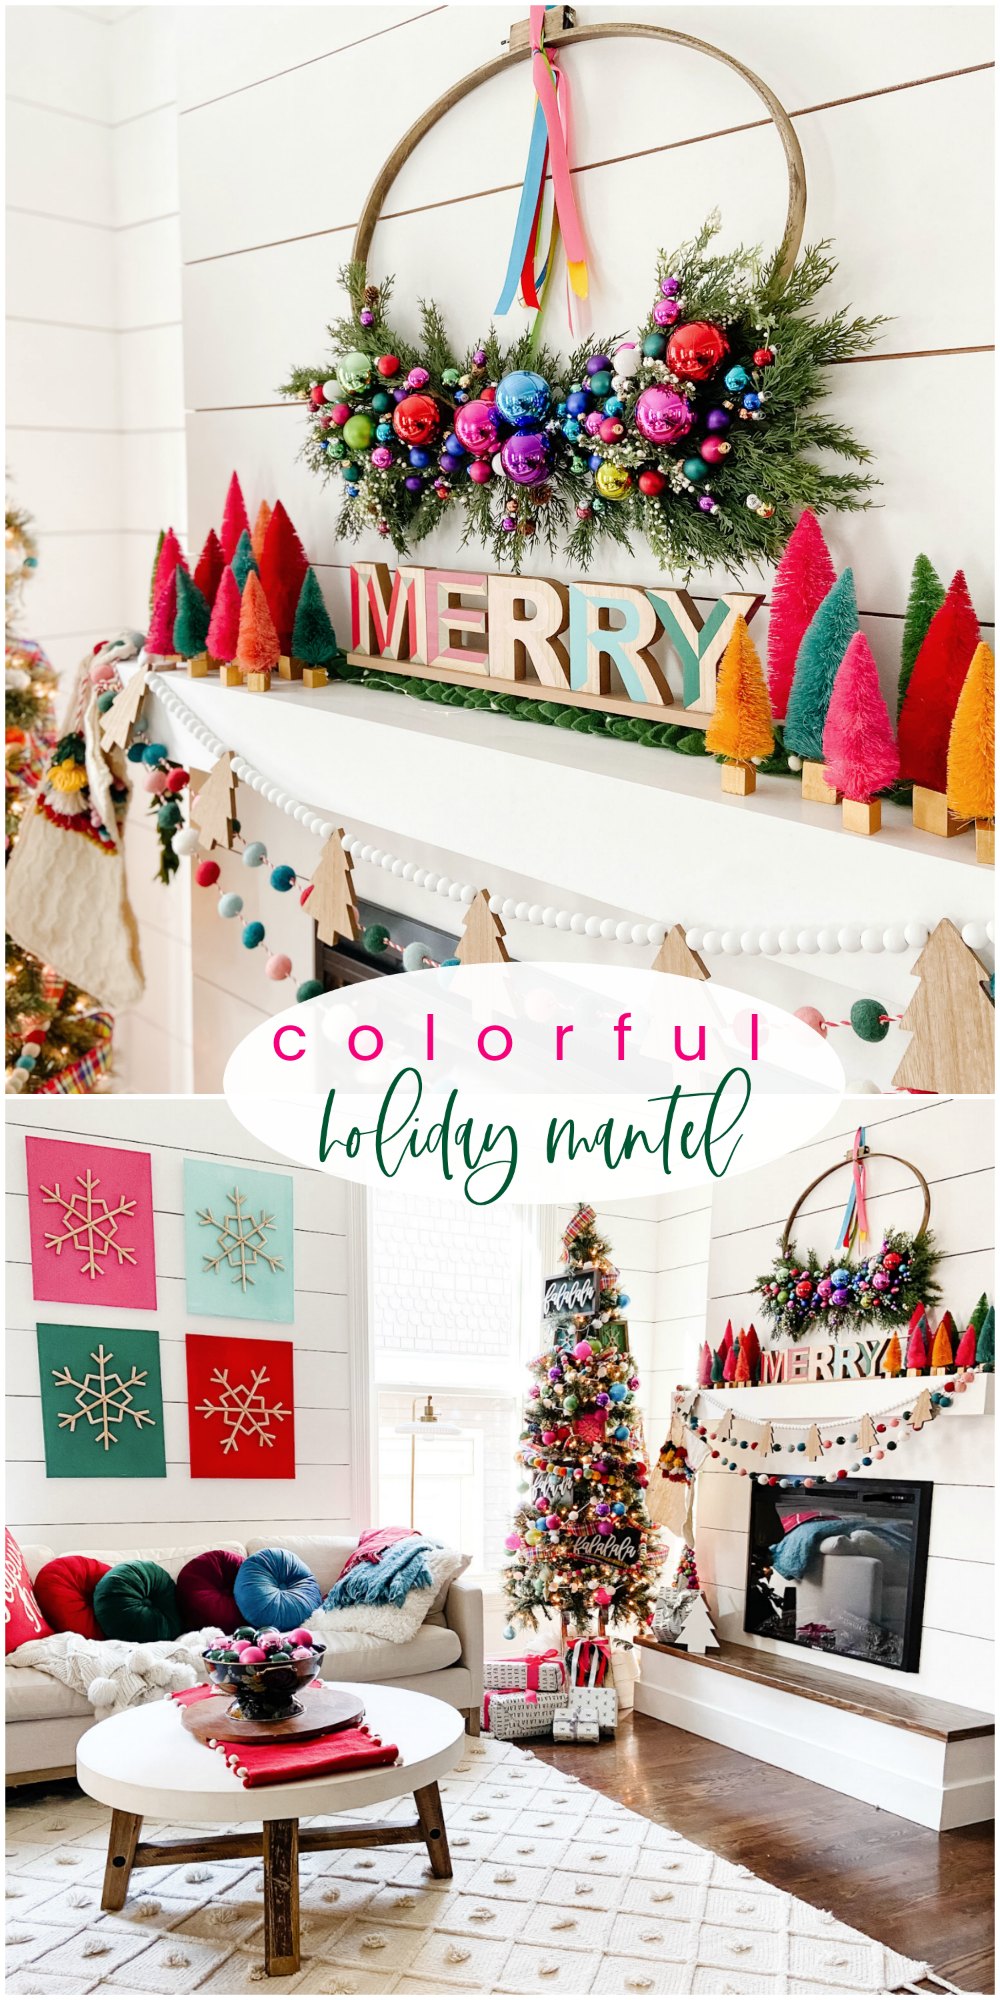 Bright Colorful Merry Mantel. Create colorful holiday cheer with a bright garland, little bottlebrush trees and an embroidery hoop ornament wreath!